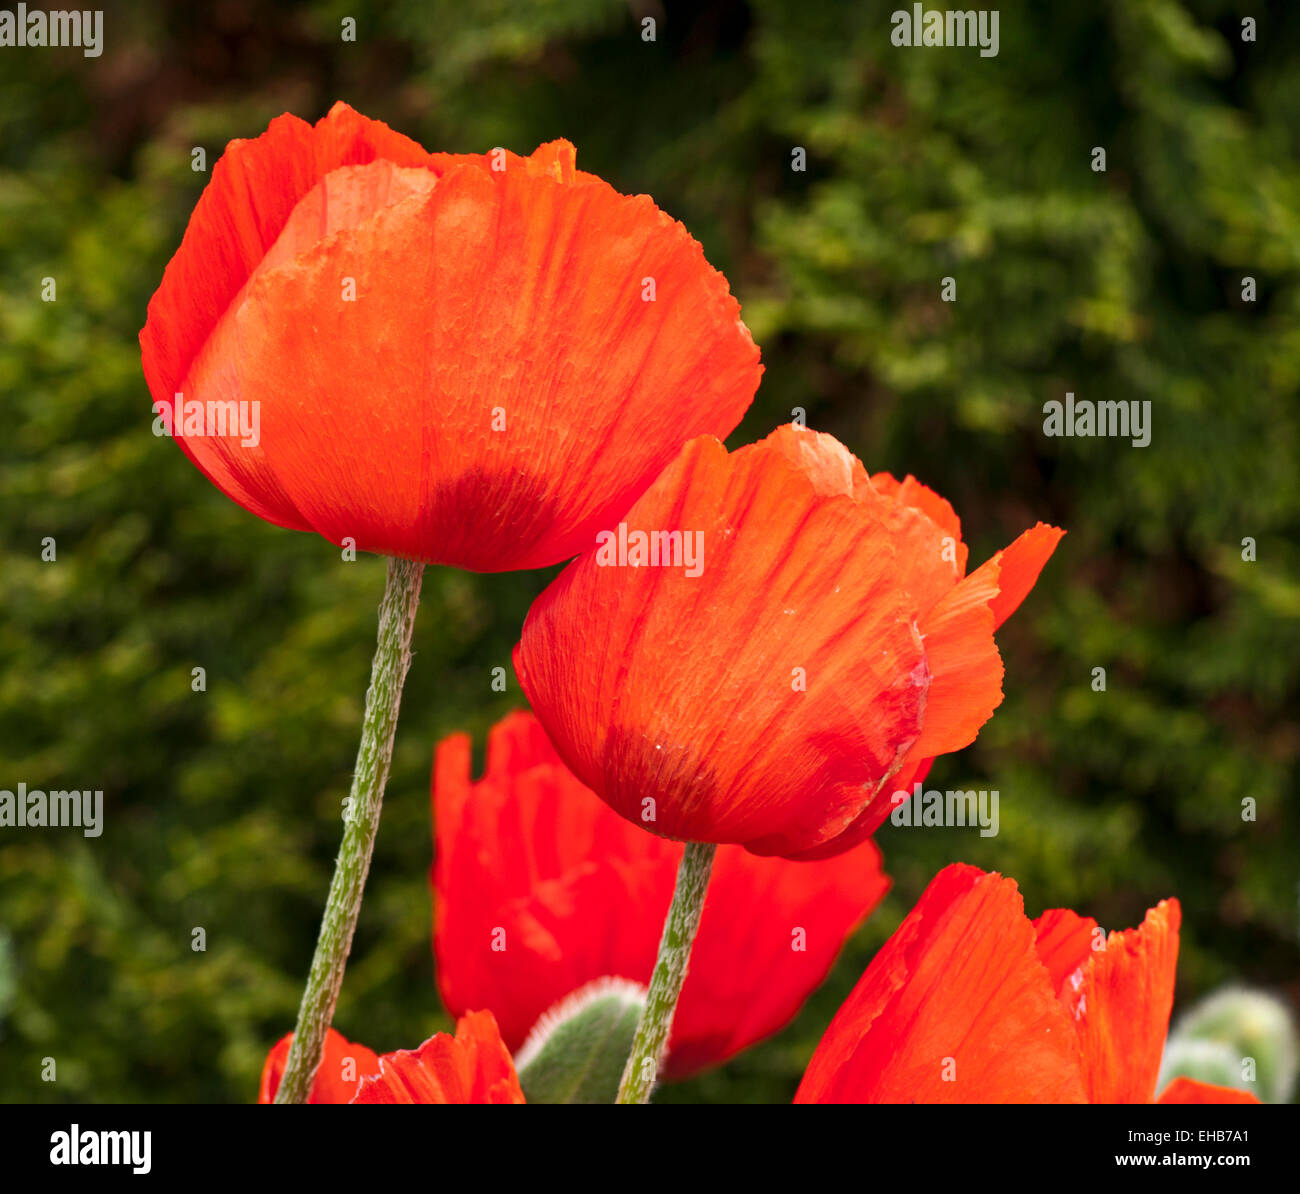 Close-up of bright orange red oriental poppies in flower in garden against background of green evergreen shrub, England UK Stock Photo